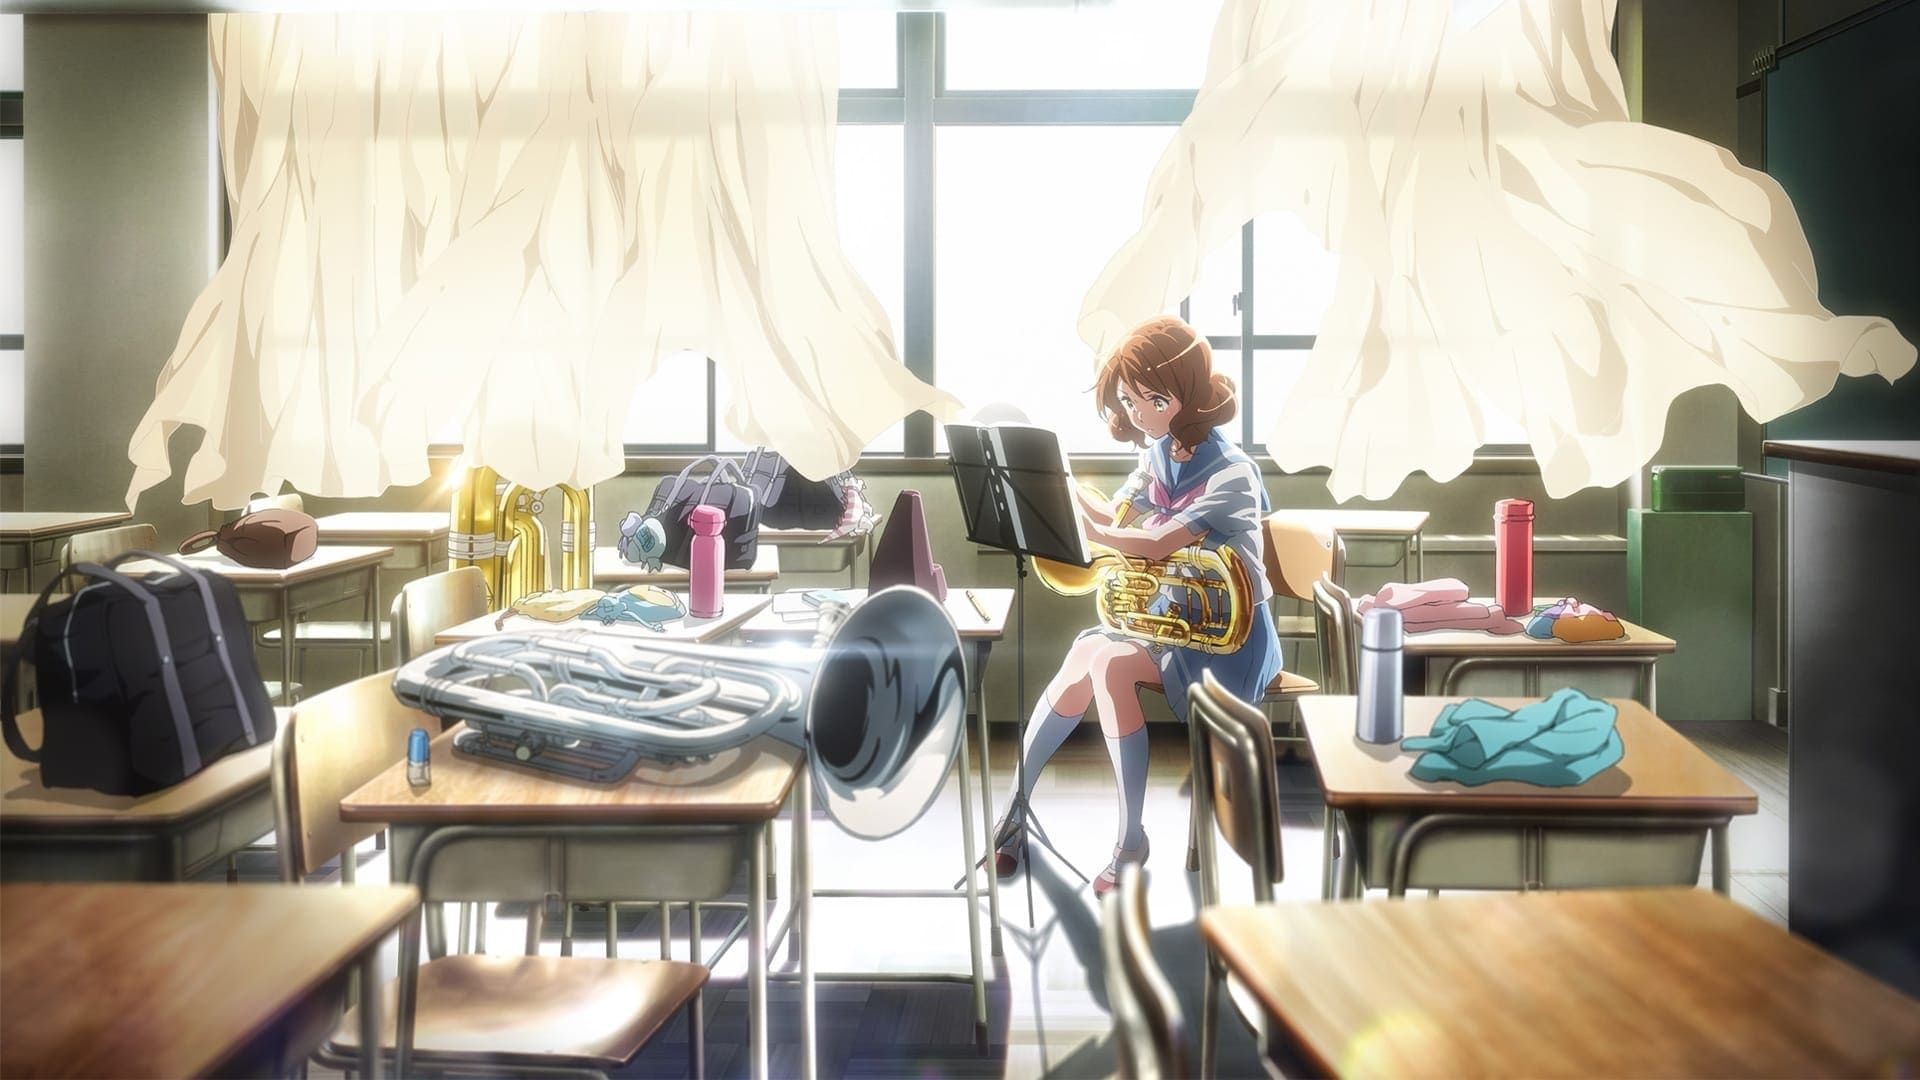 Sound! Euphonium: The Movie - Welcome to the Kitauji High School Concert Band background